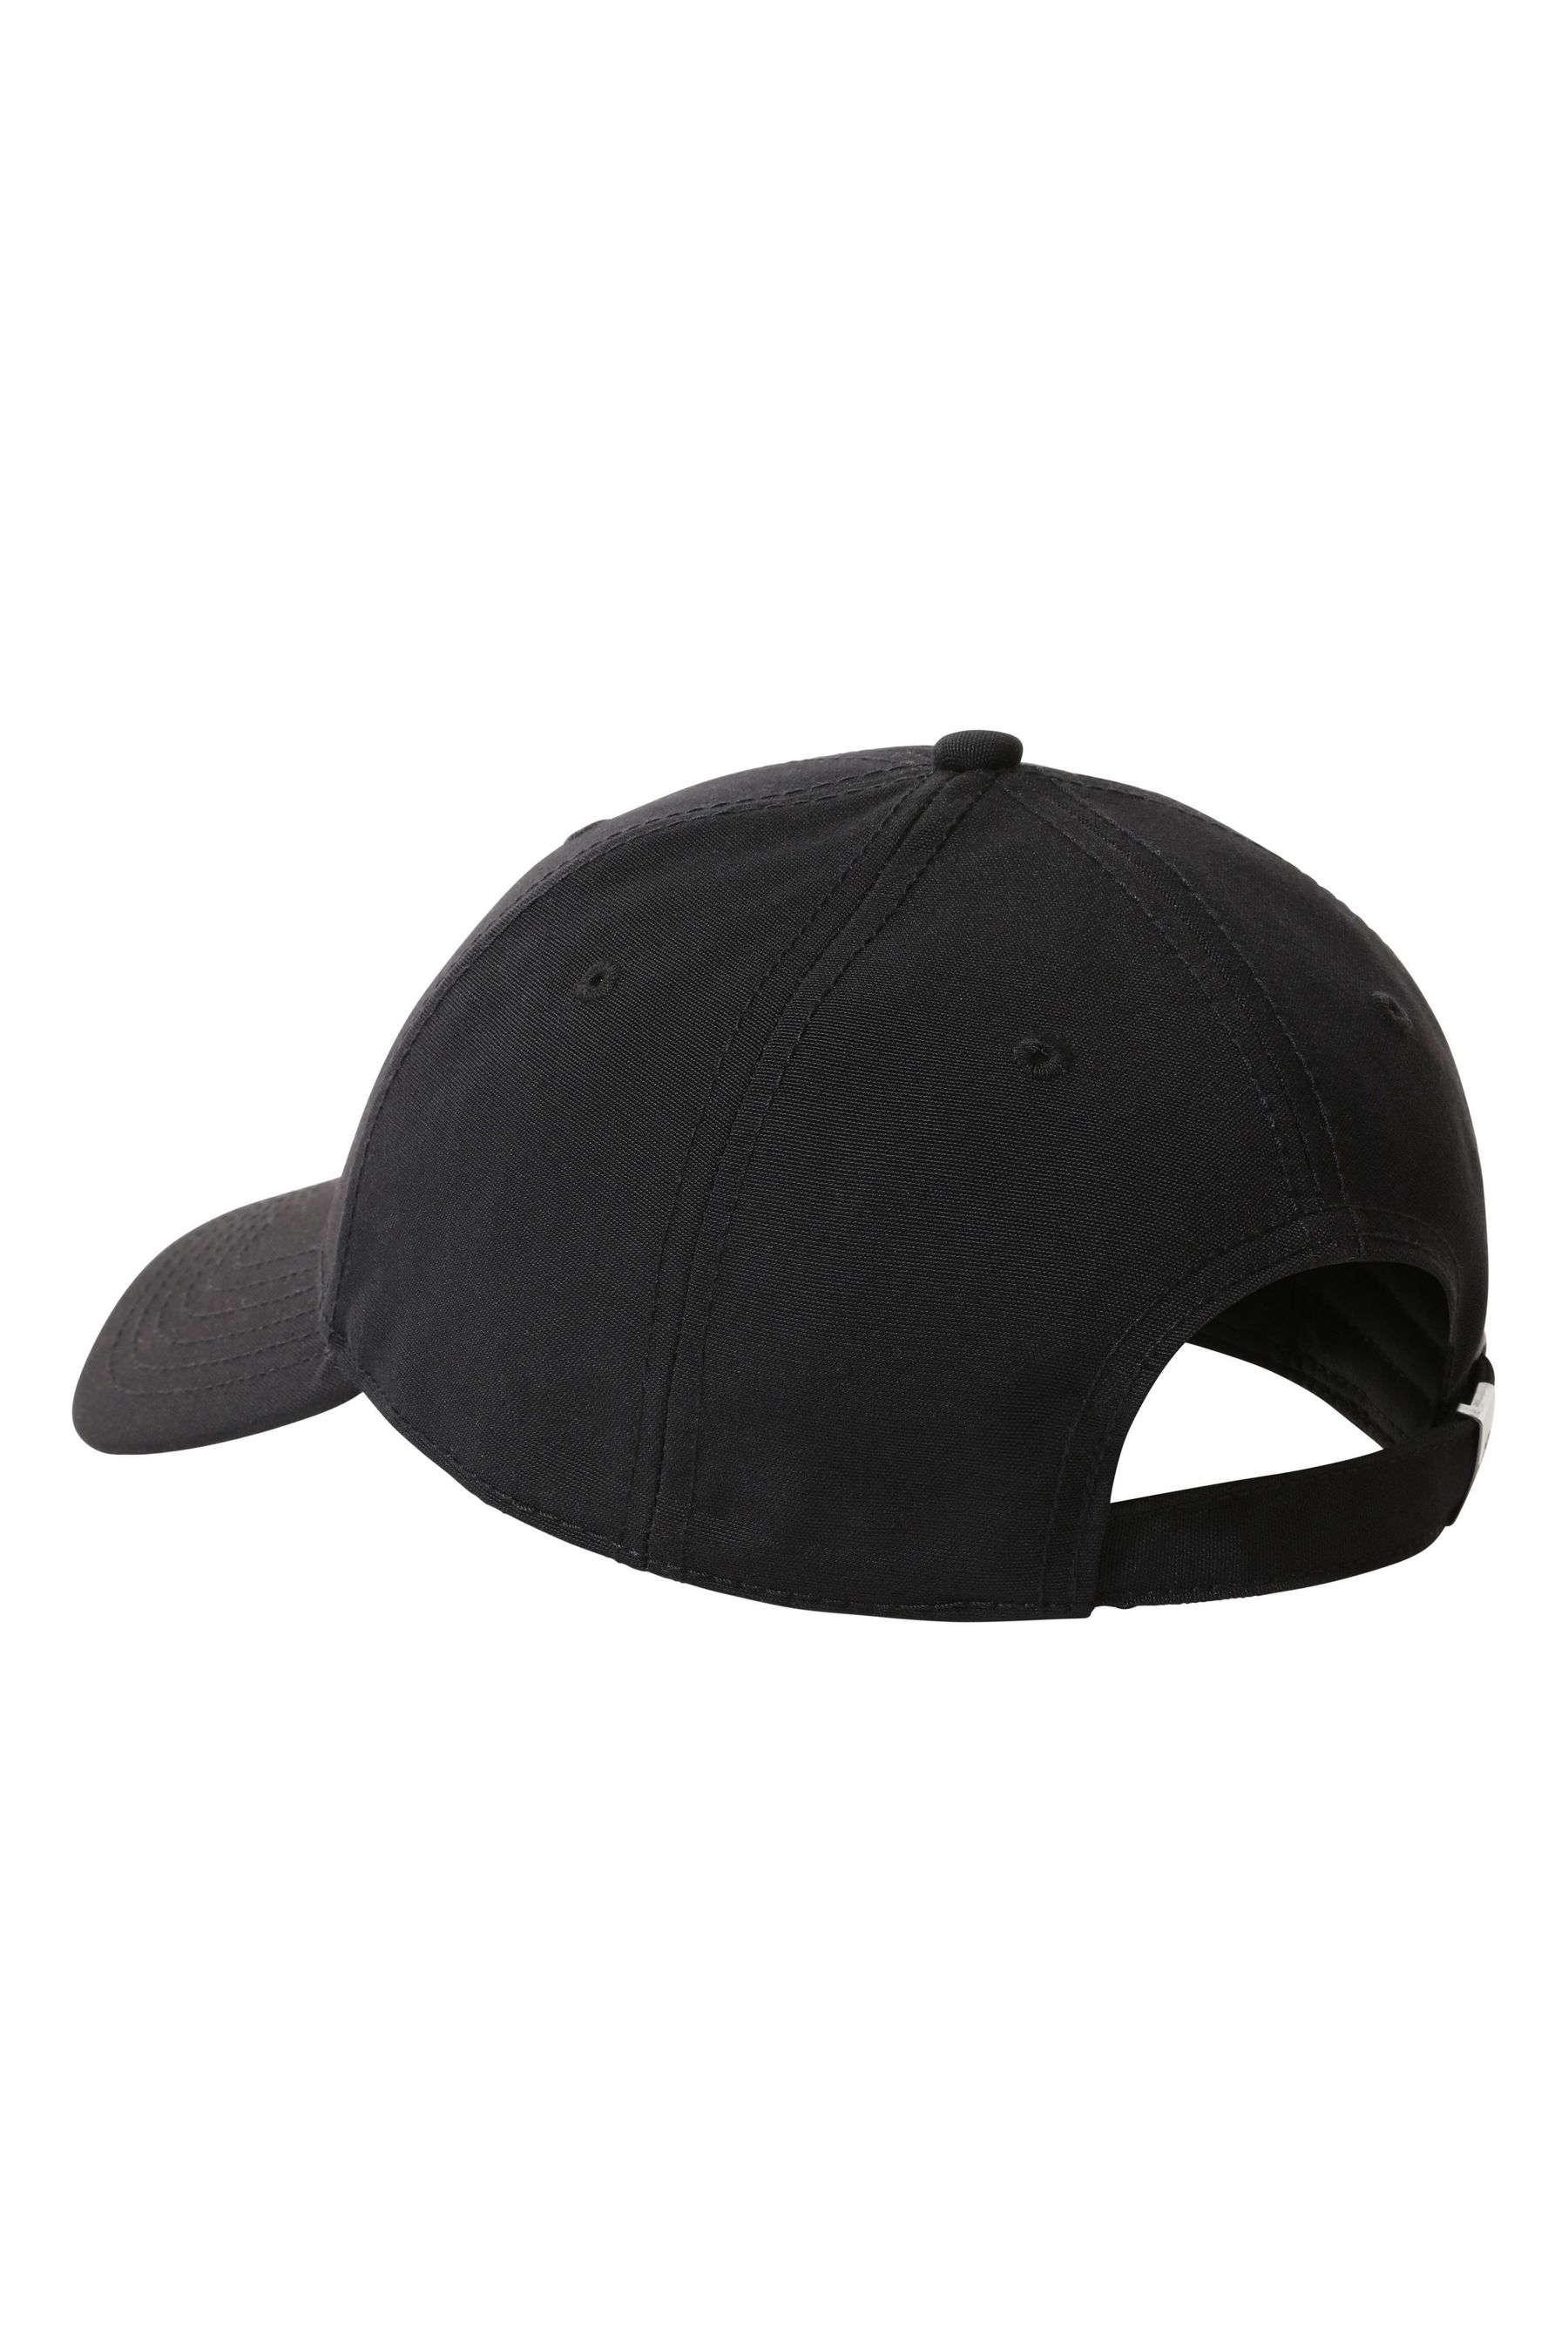 Buy The North Face 66 Classic Cap from the Next UK online shop